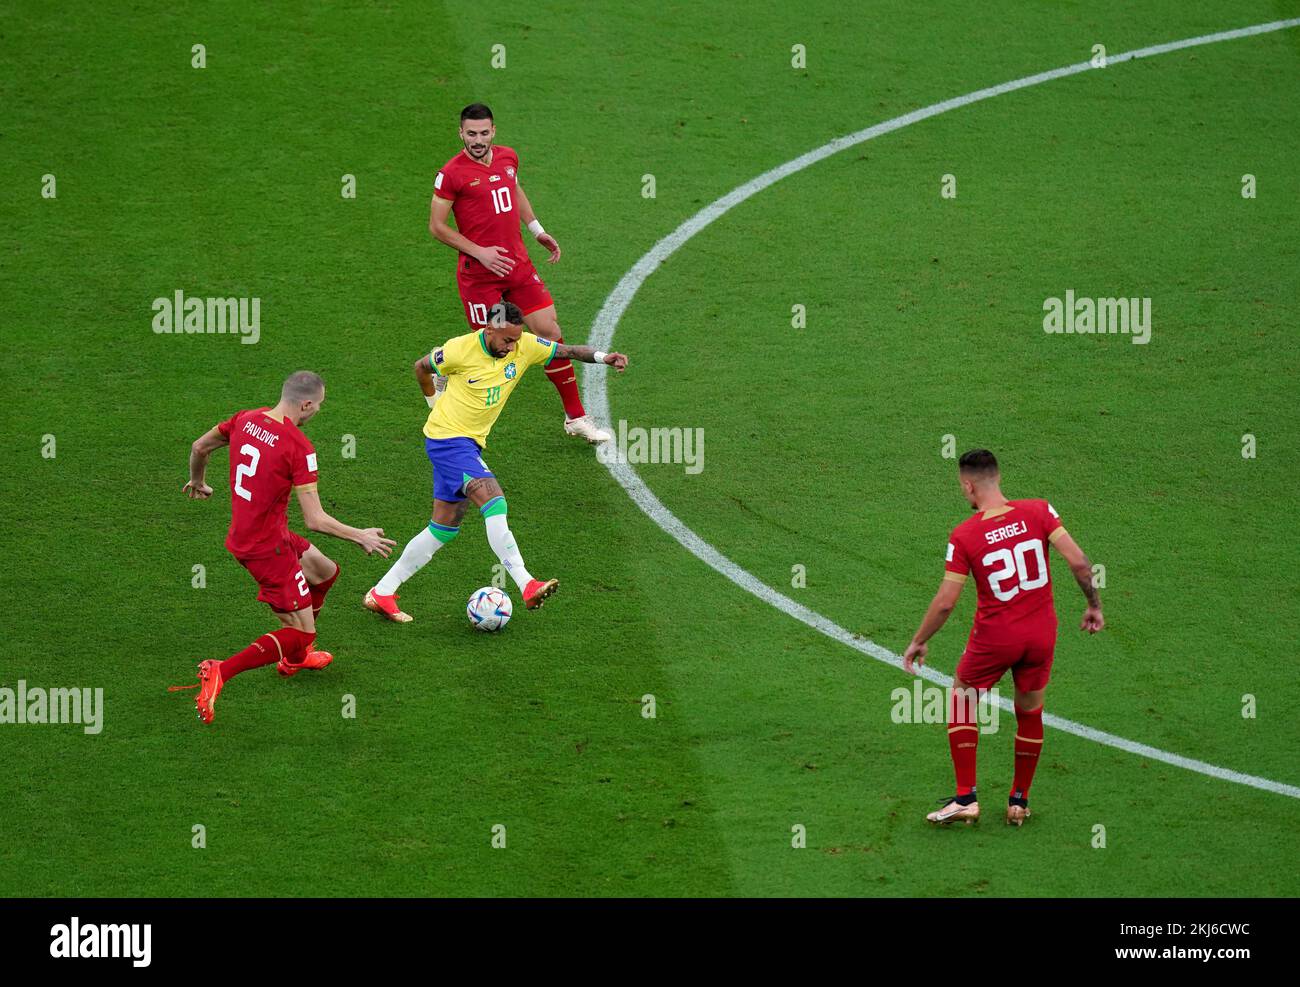 Brazil’s Neymar is surrounded by Serbia’s Strahinja Pavlovic (left) Dusan Tadic (top) and Sergej Milinkovic-Savic (right) during the FIFA World Cup Group G match at the Lusail Stadium, Lusail, Qatar. Picture date: Thursday November 24, 2022. Stock Photo